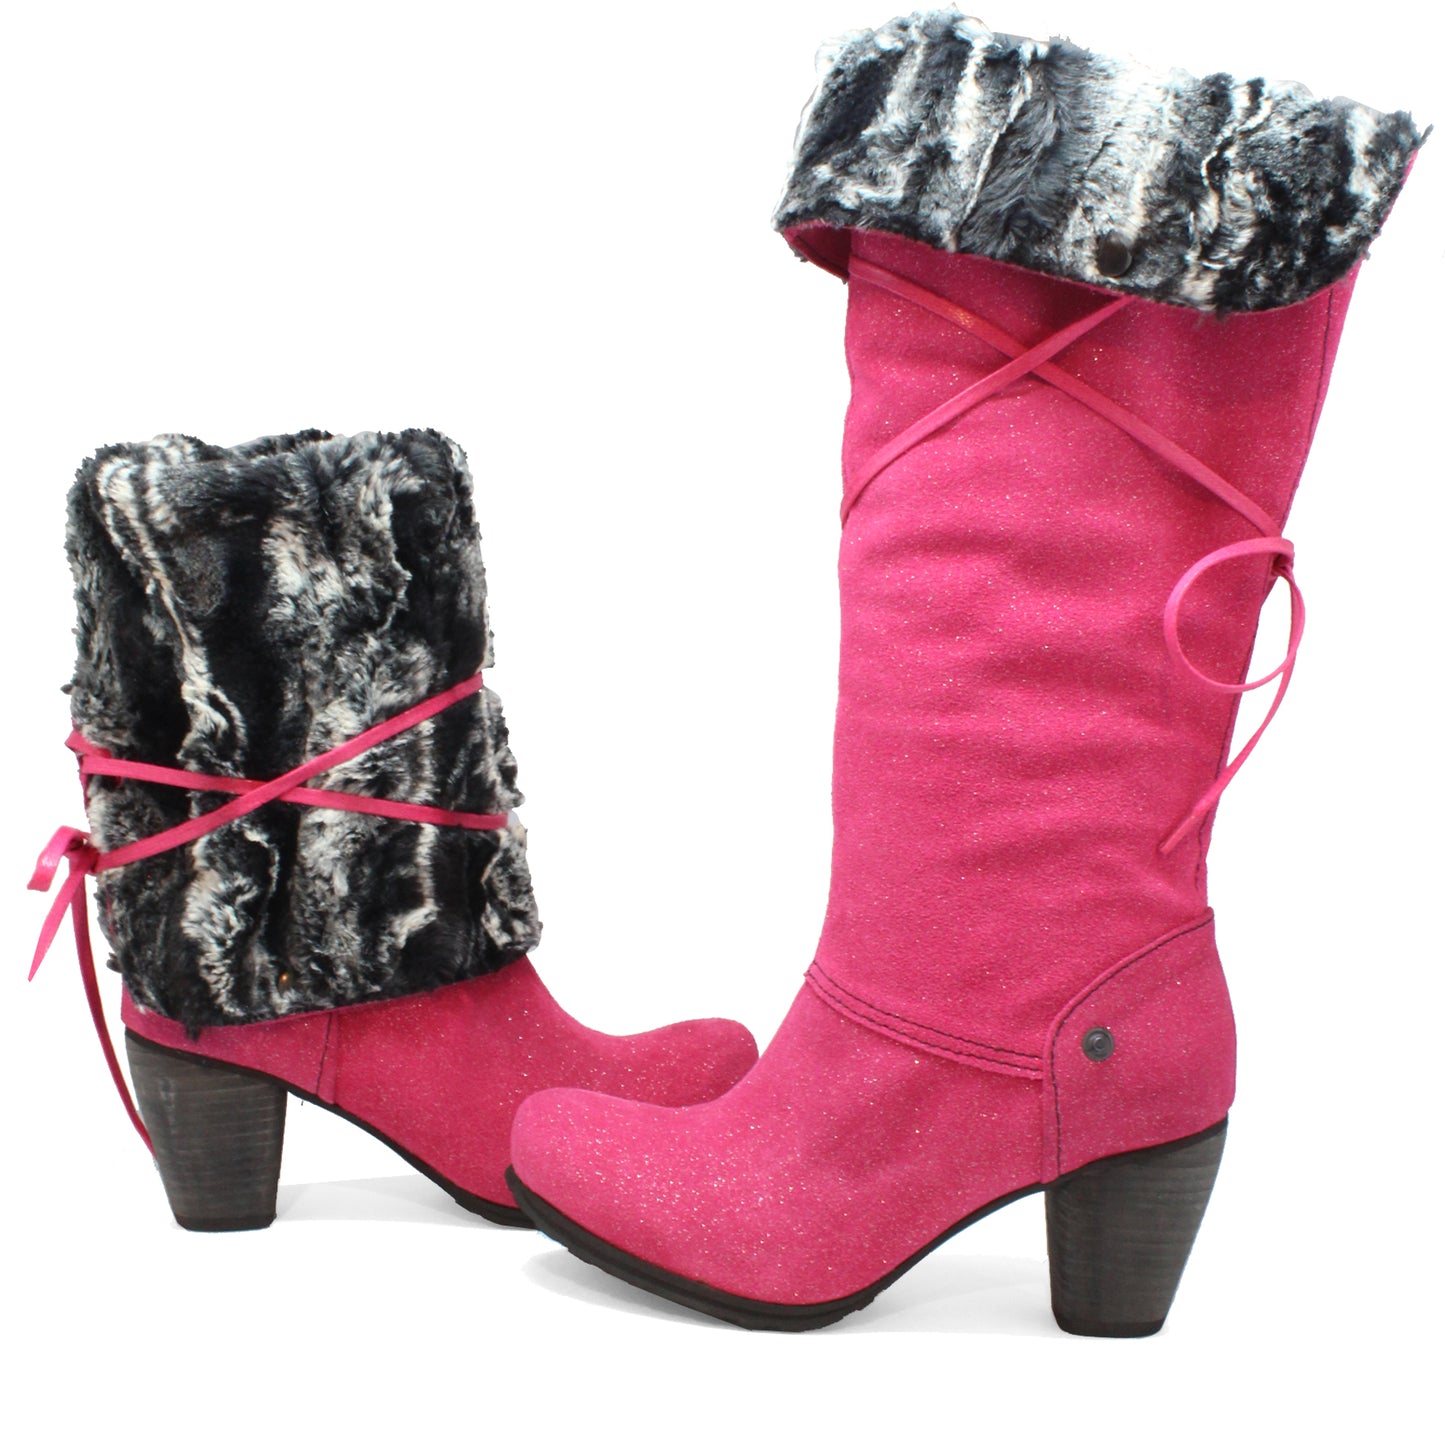 Pulpeux  Fuchsia suede long leg boot- Last pairs  37 AND 38!